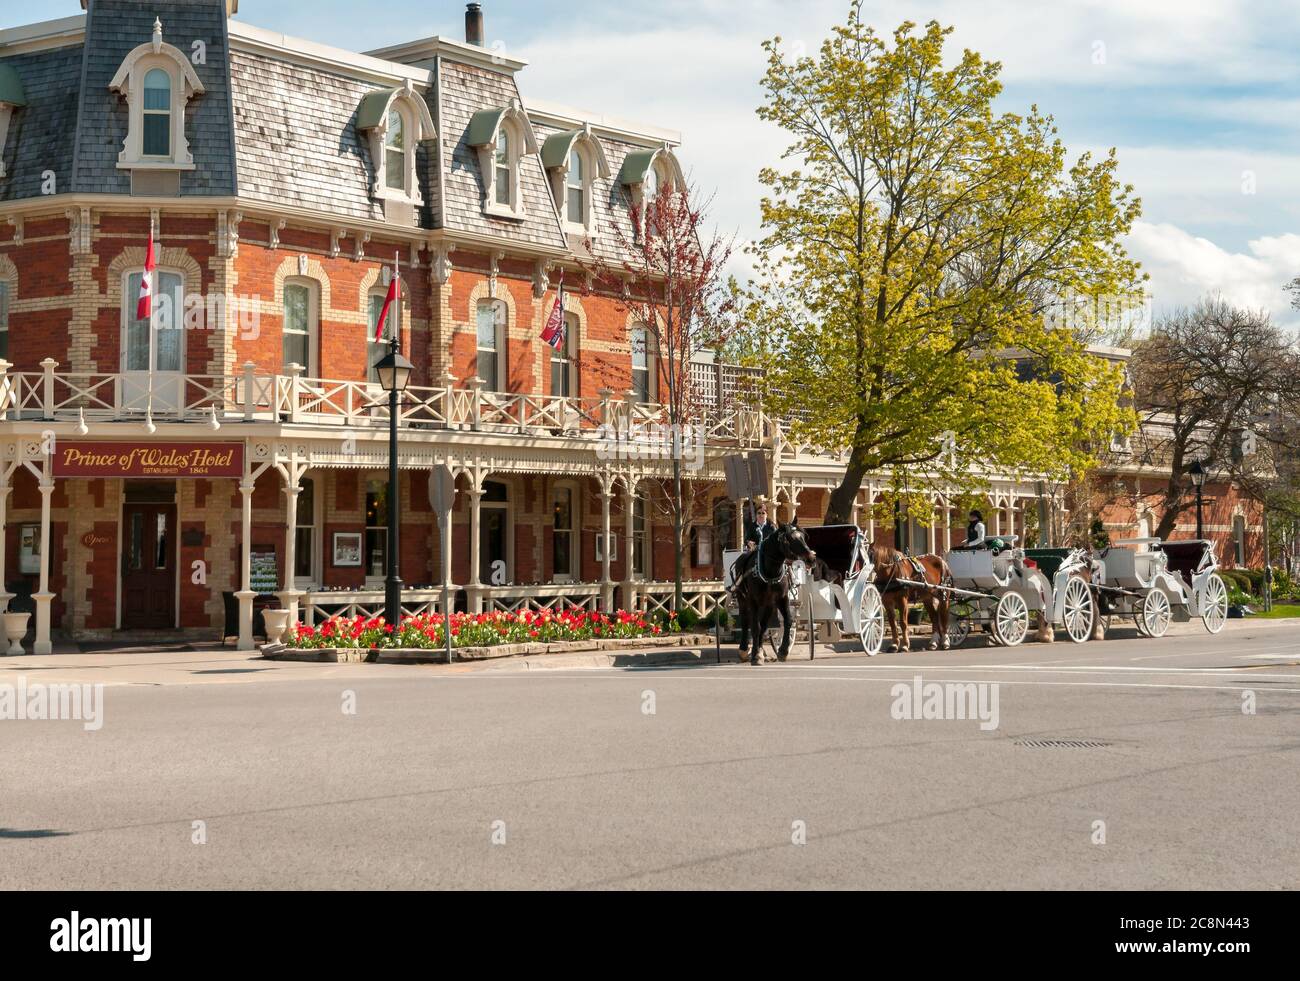 Niagara-on-the-Lake, Canada - April 25, 2012: View of the historic Prince of Wales Hotel in the center of Niagara-on-the-Lake, Canada Stock Photo